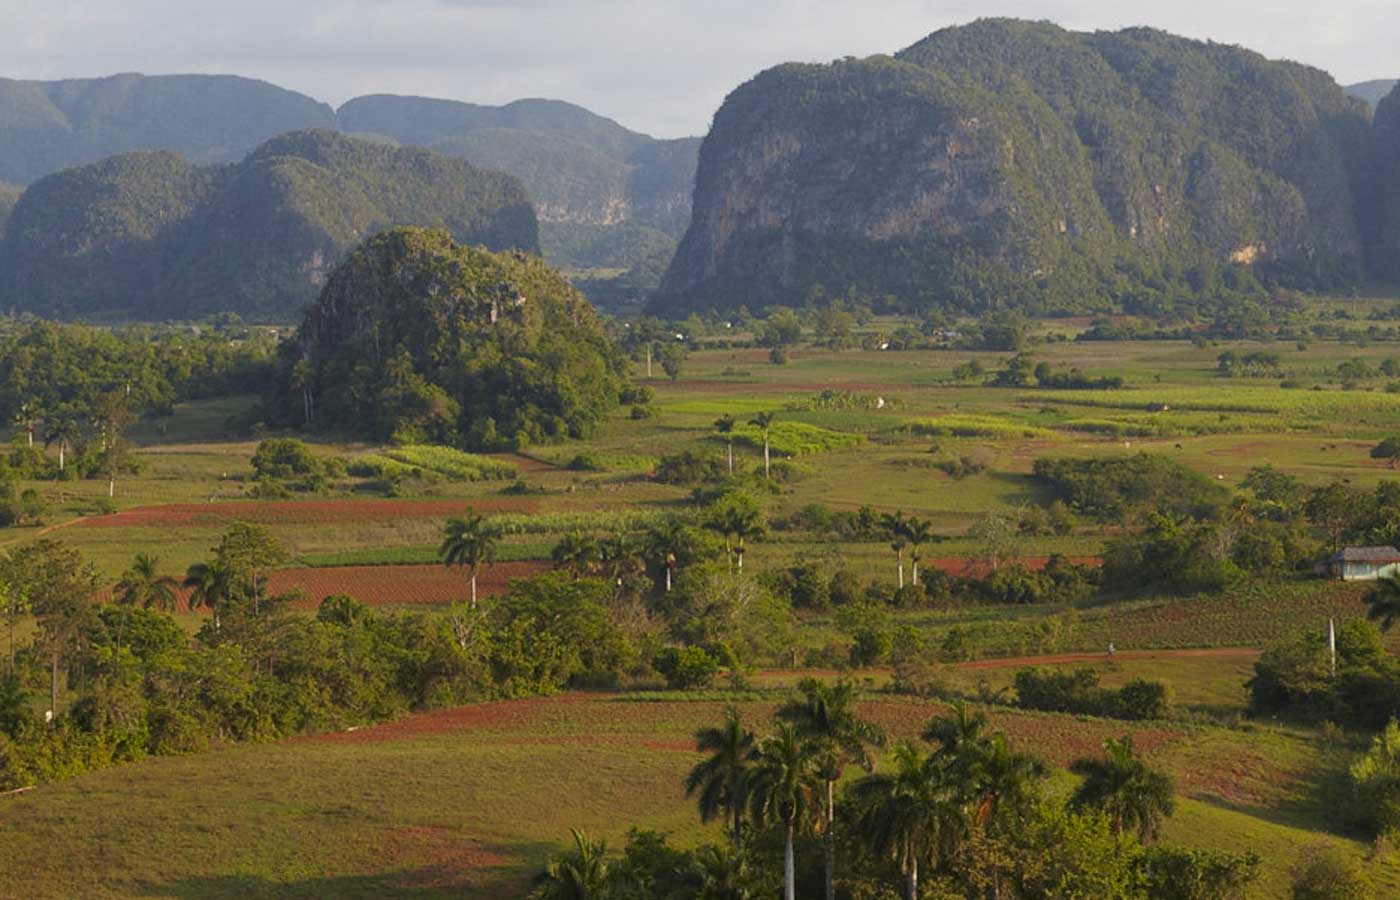 Luxury holidays to Vinales